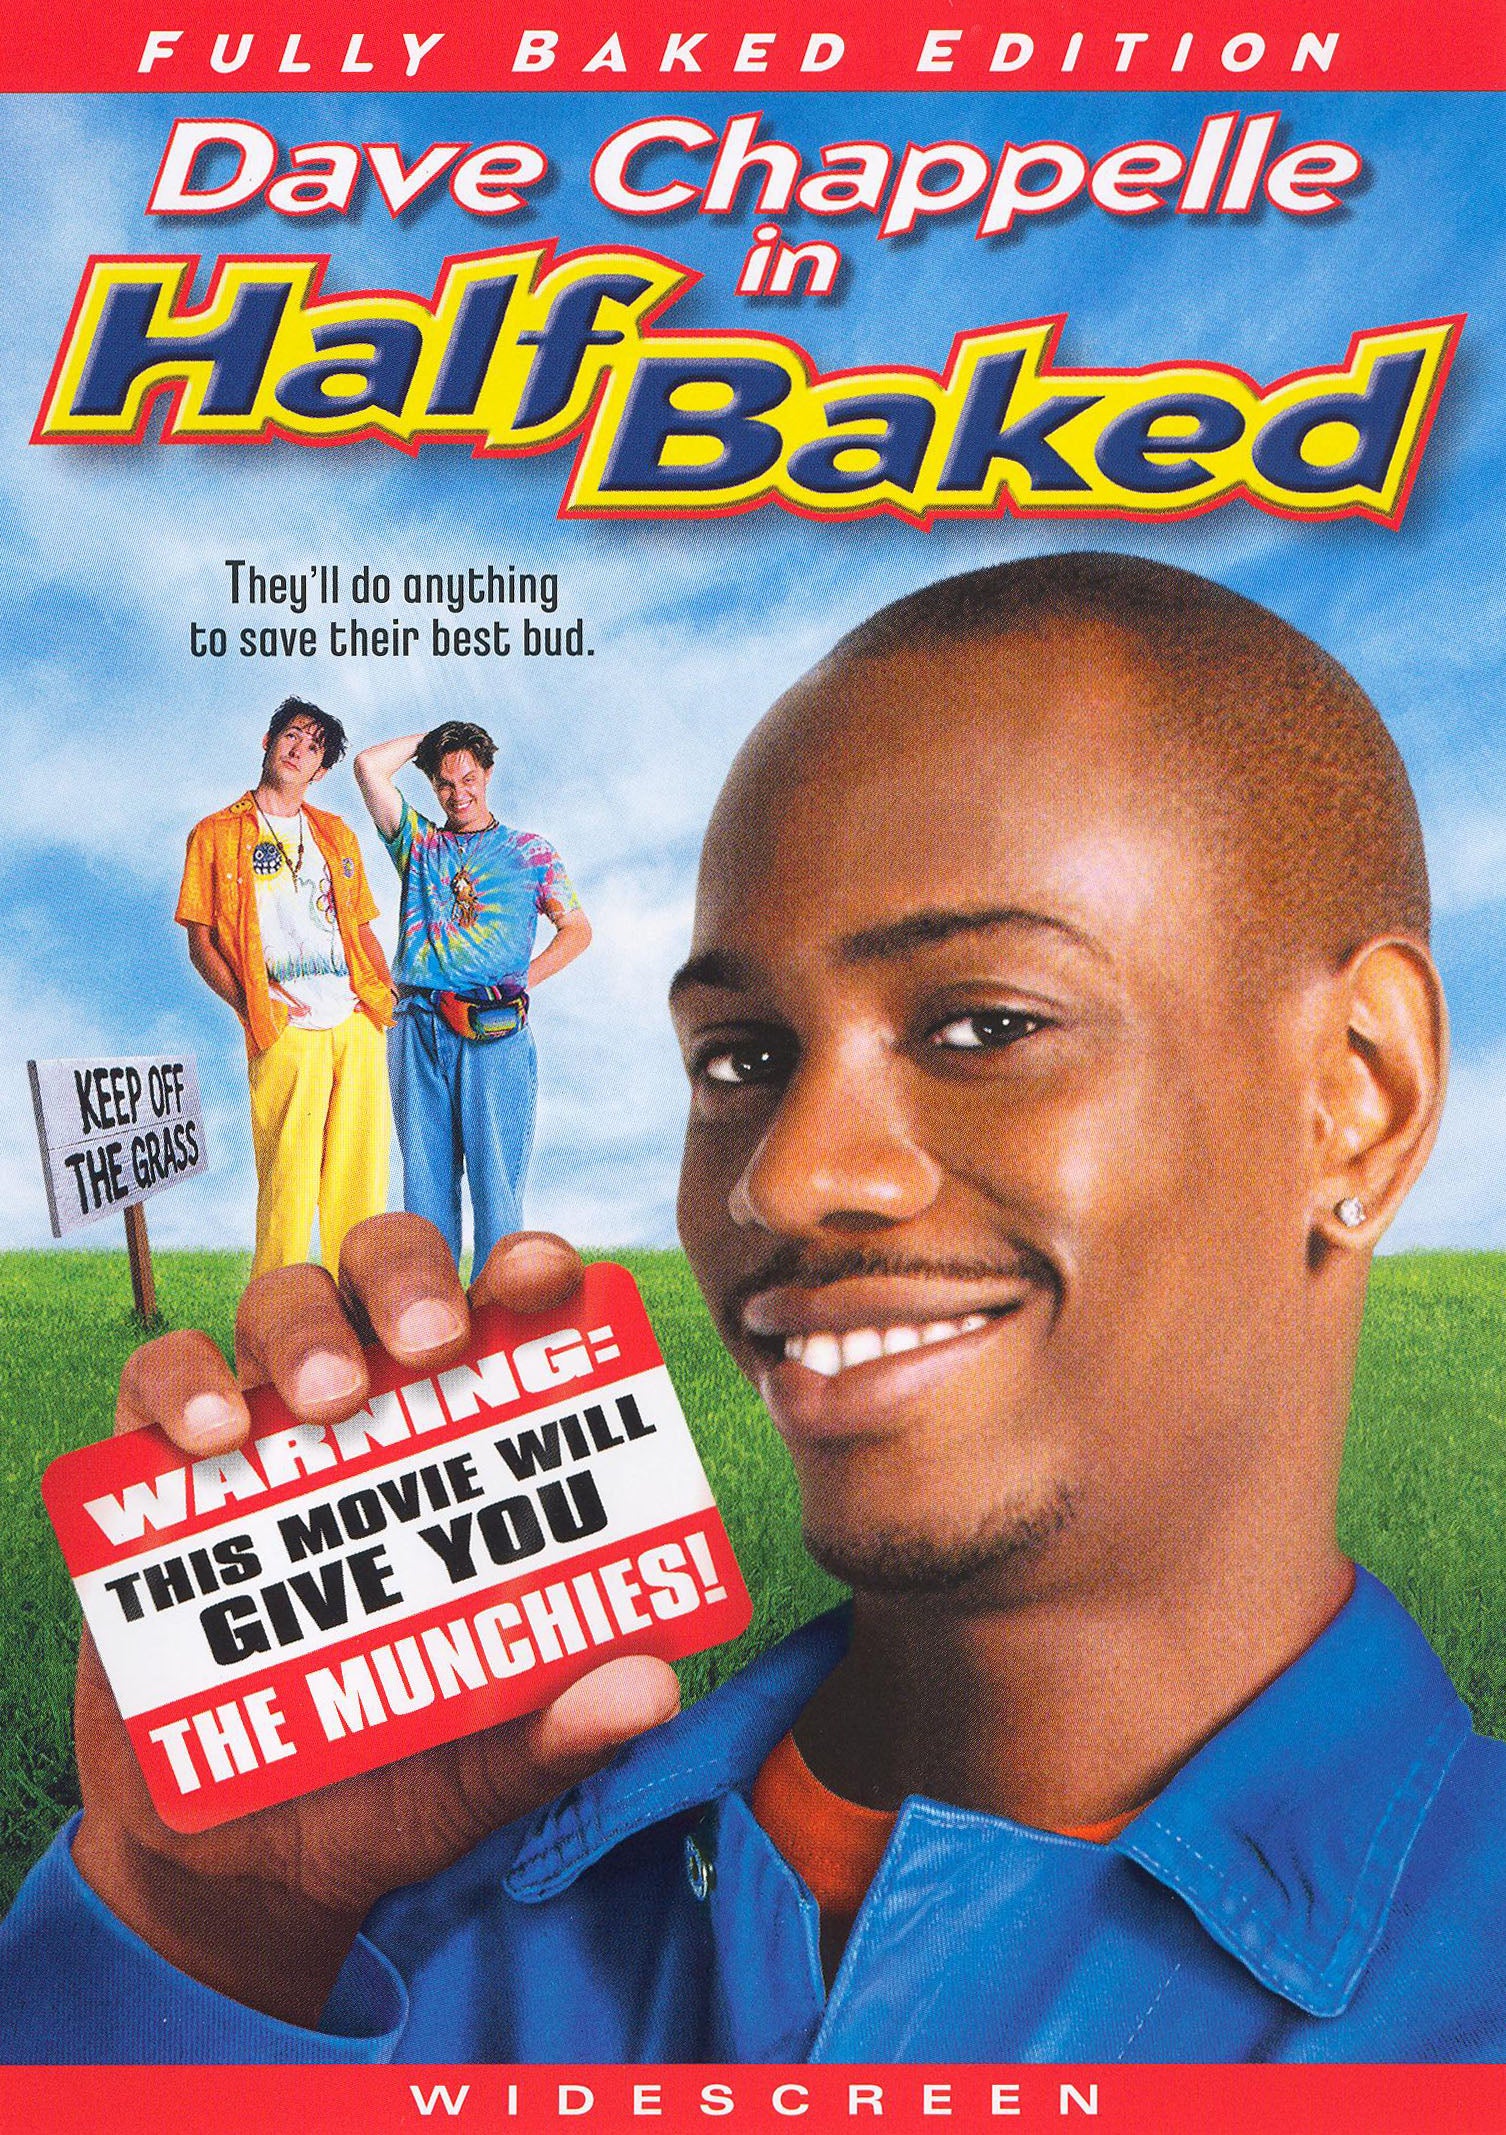 Half Baked [WS] [Fully Baked Edition] cover art